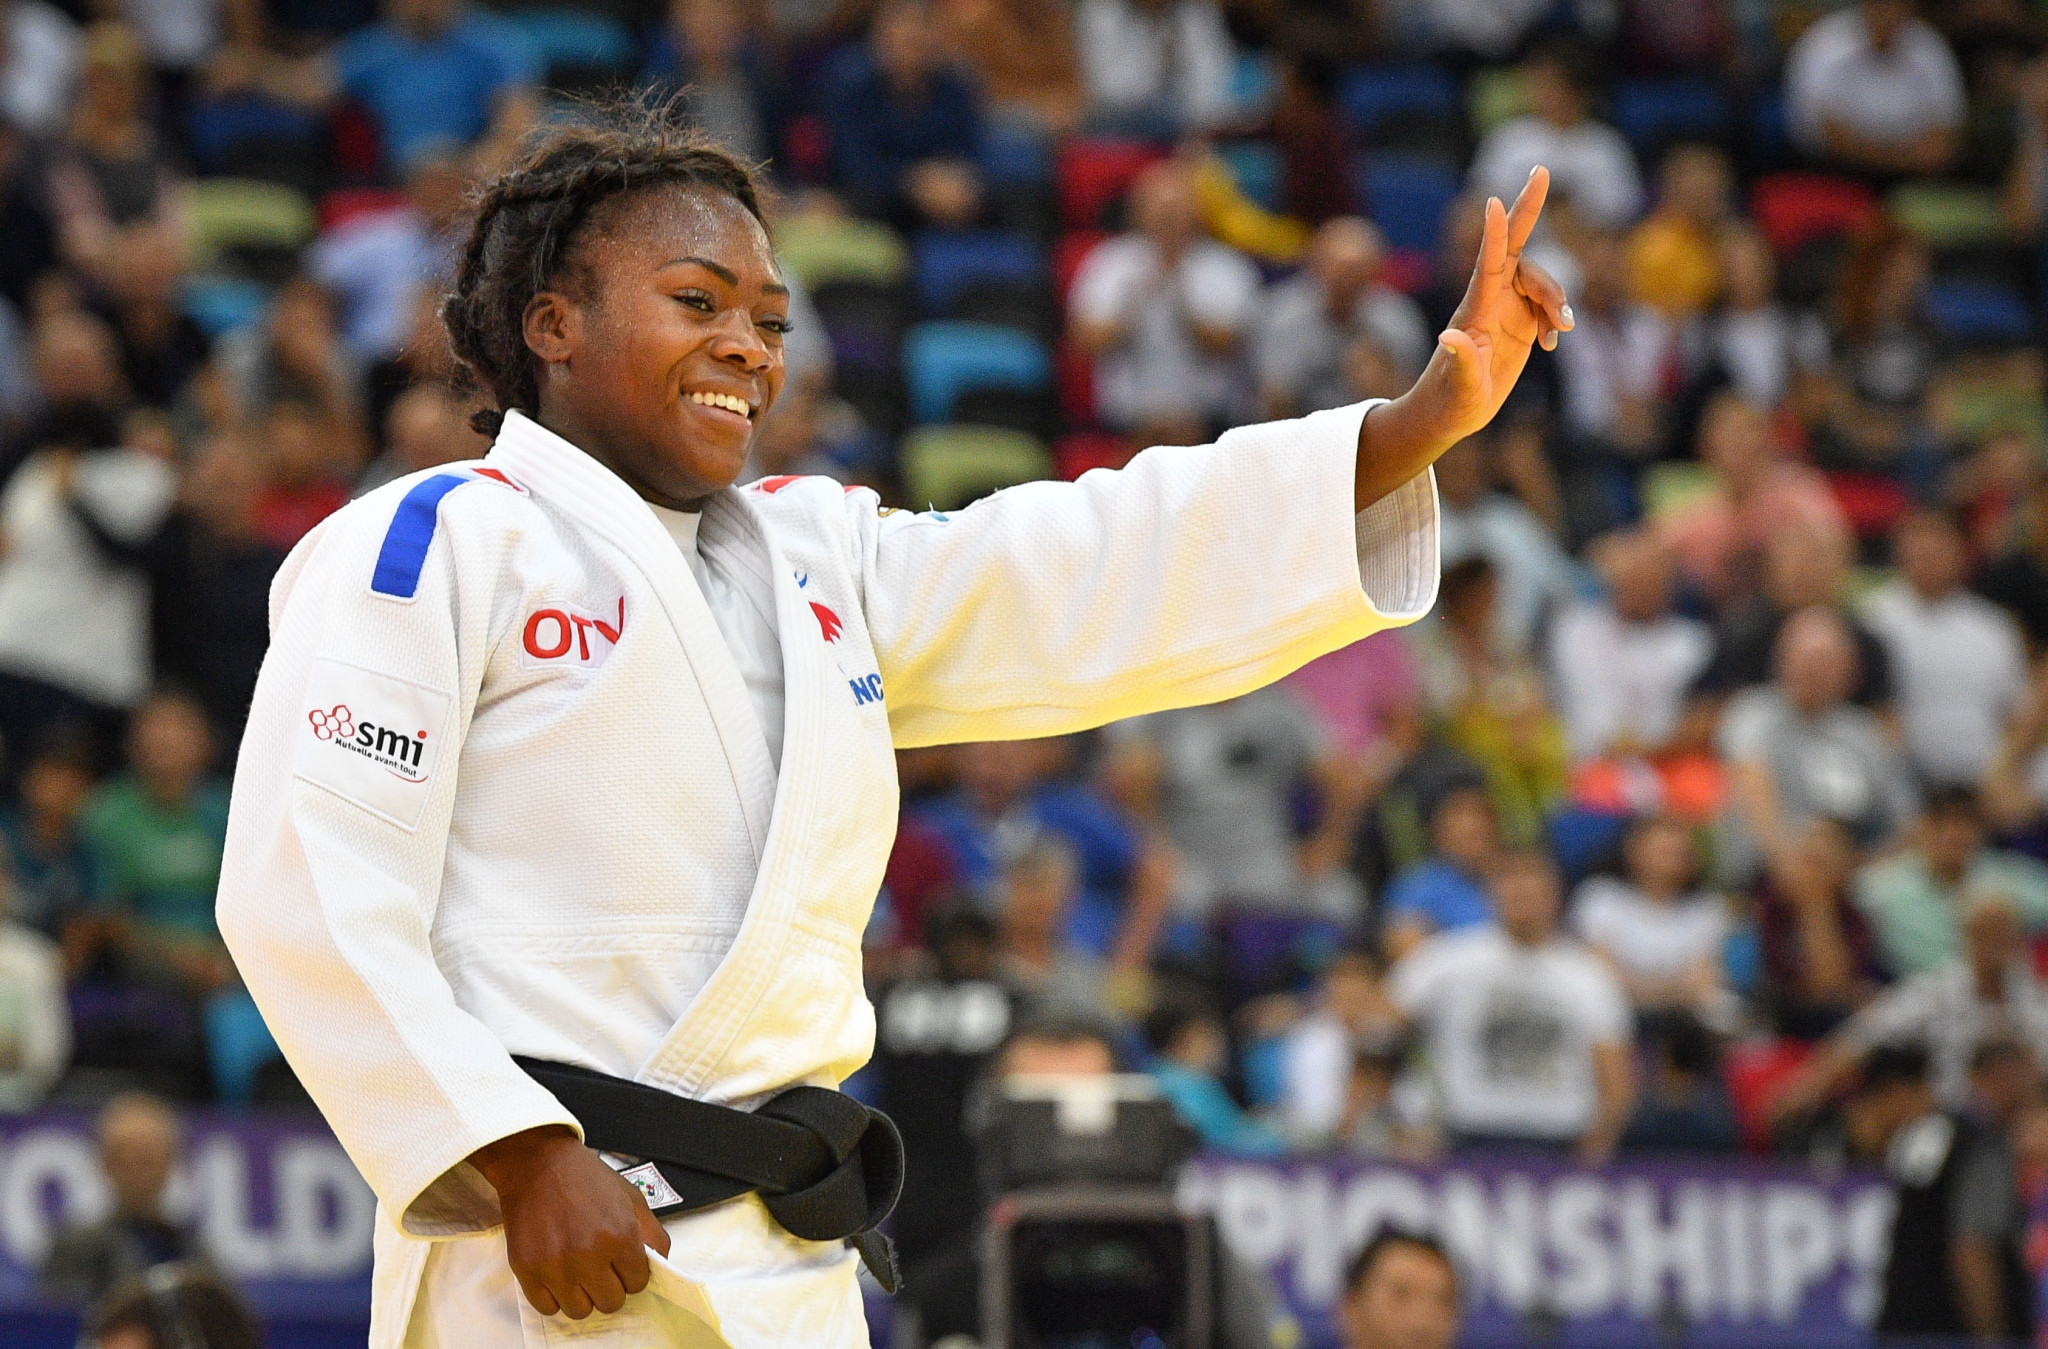 Agbegnenou becomes three-time world judo champion as Iran celebrates first gold medal since 2003